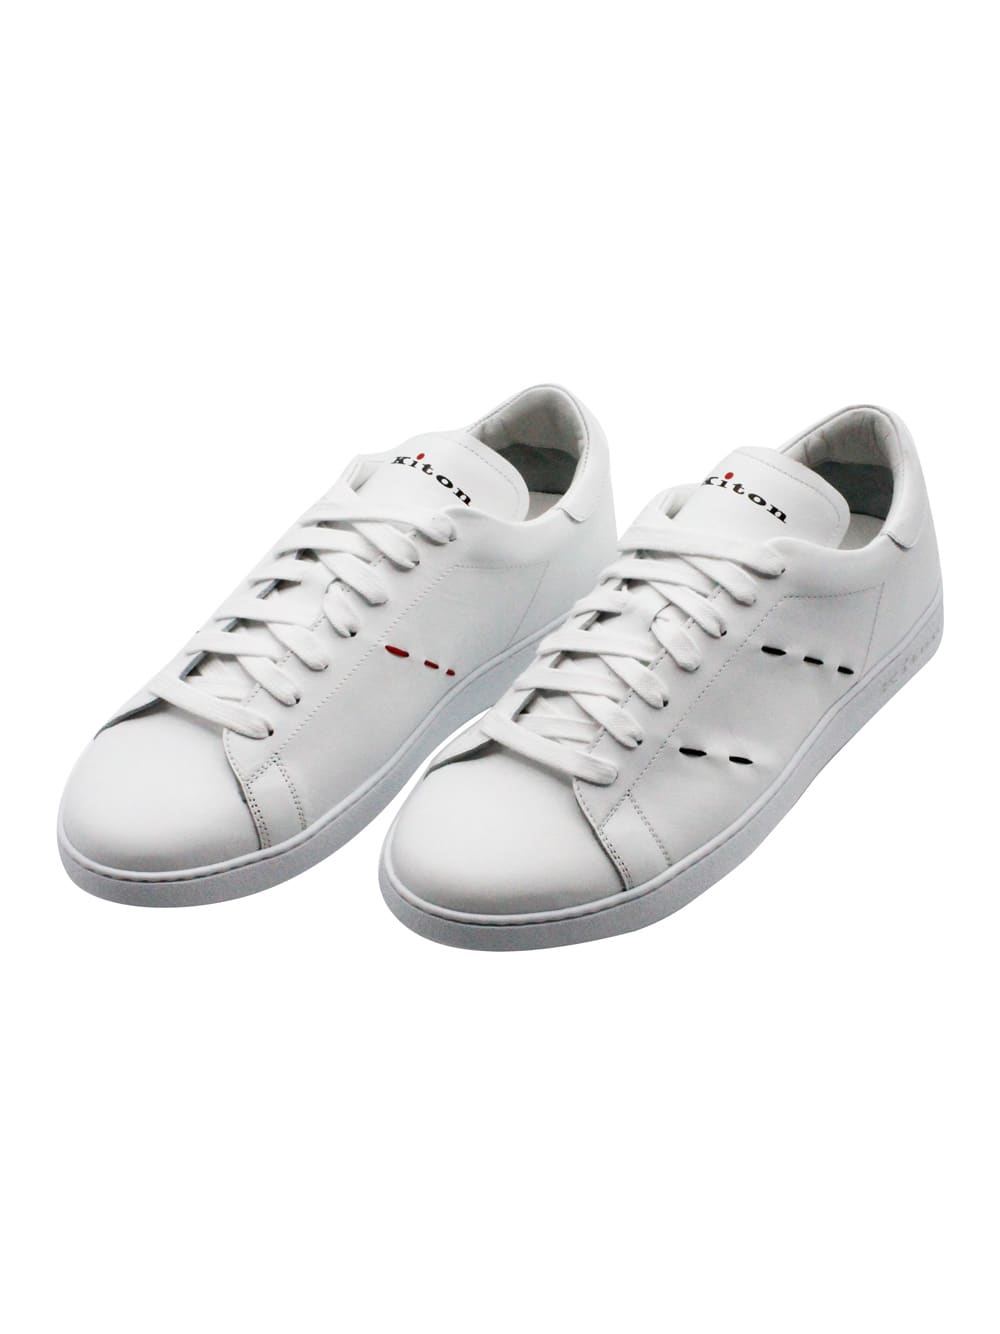 Kiton Lightweight Sneaker Shoe In Soft Leather With Contrasting Color Finishes And Stitching. Tongue With  In White